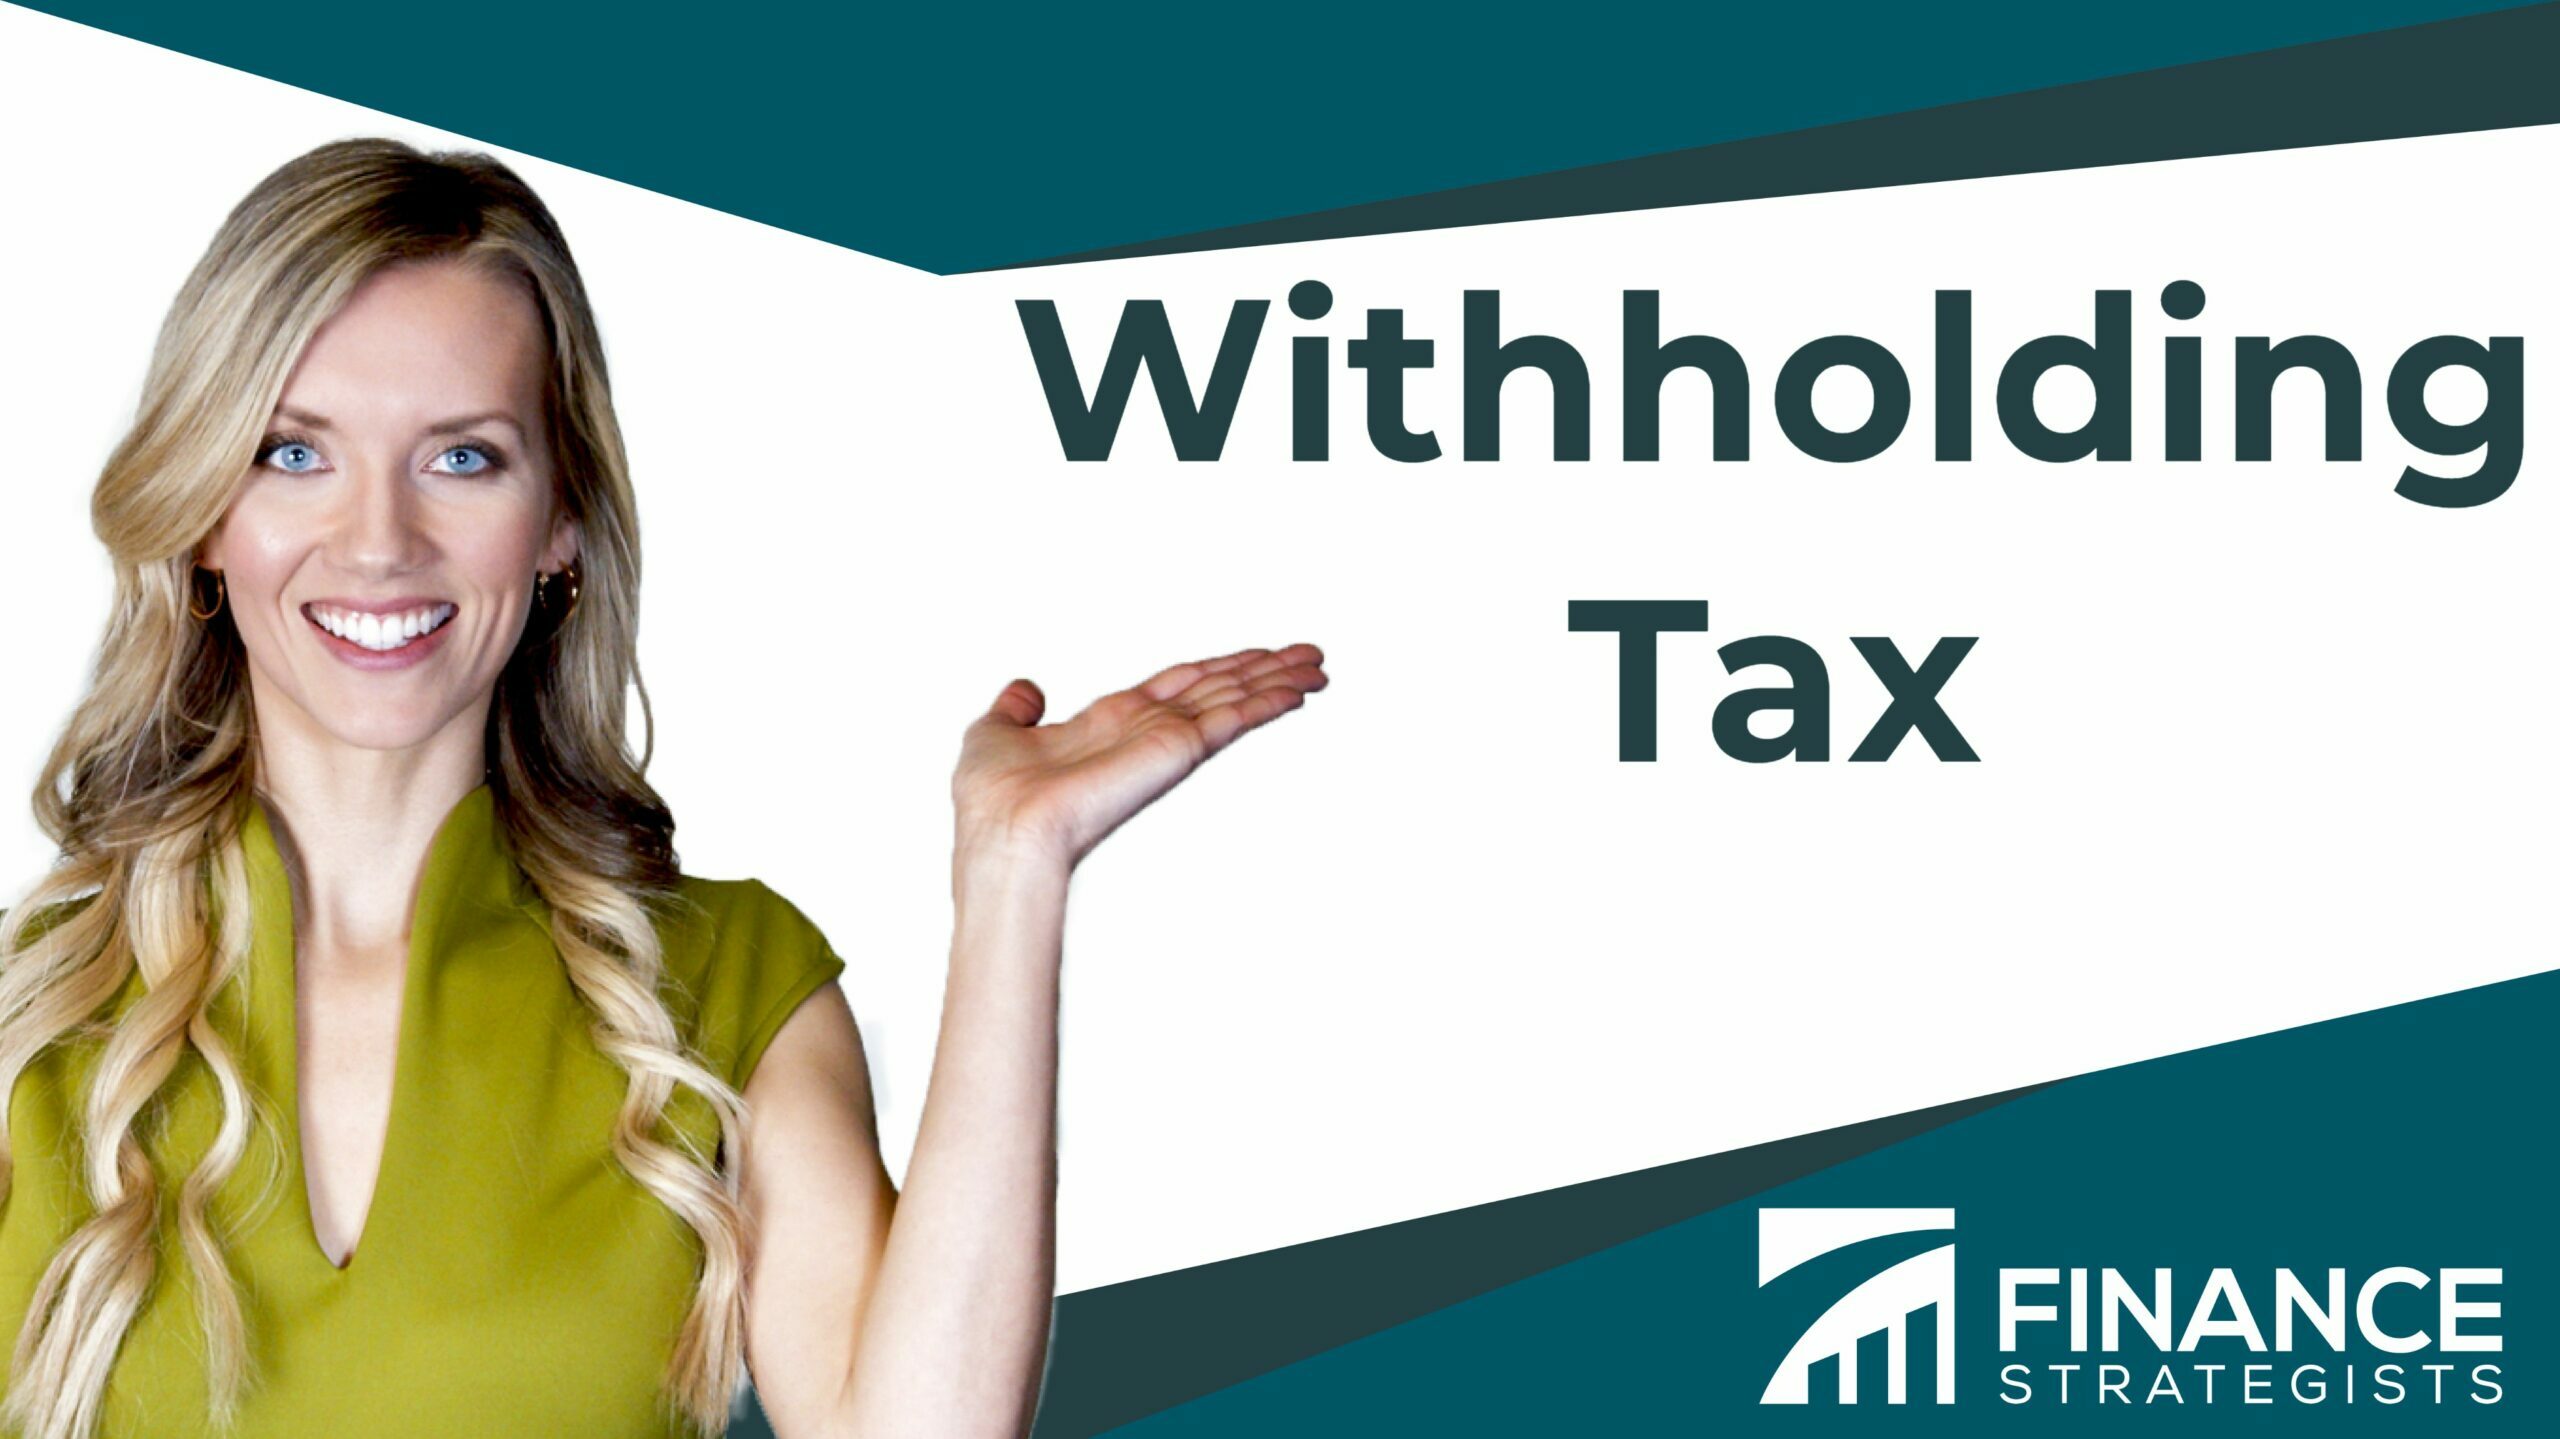 Withholding Tax Definition, Purpose, Benefits and Exemptions